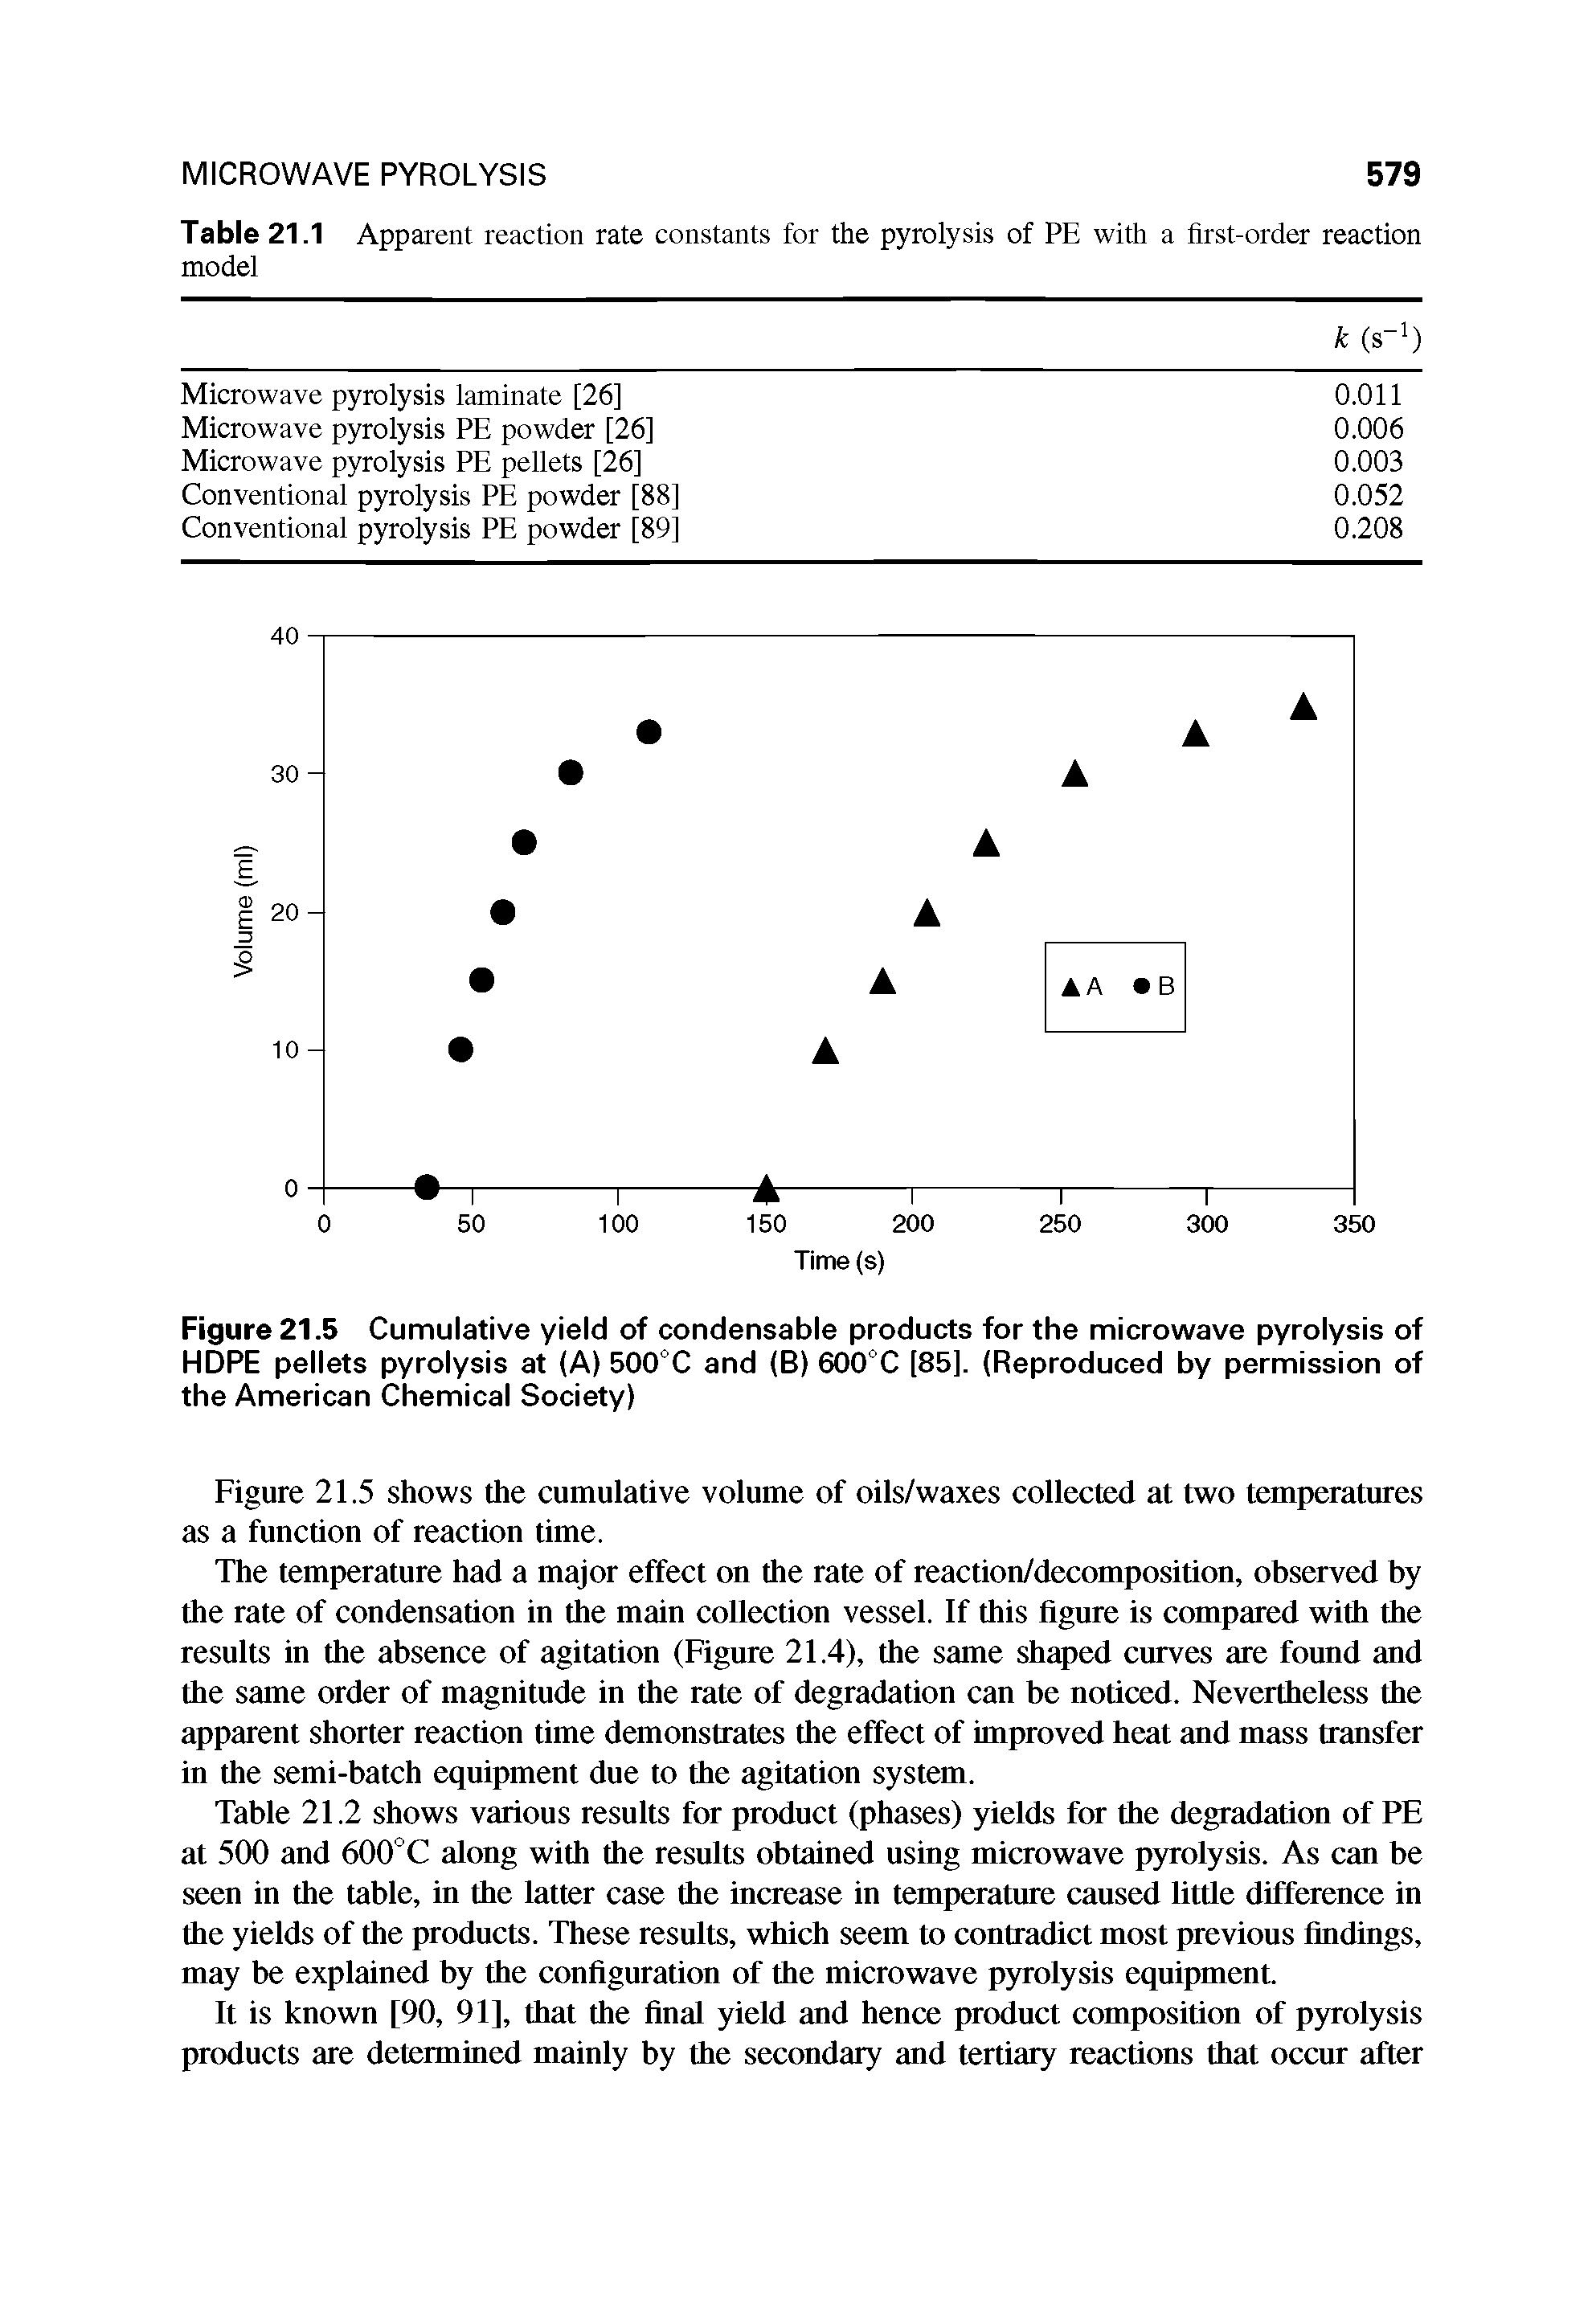 Figure 21.5 Cumulative yield of condensable products for the microwave pyrolysis of HOPE pellets pyrolysis at (A) 500°C and (B) 600°C [85]. (Reproduced by permission of the American Chemical Society)...